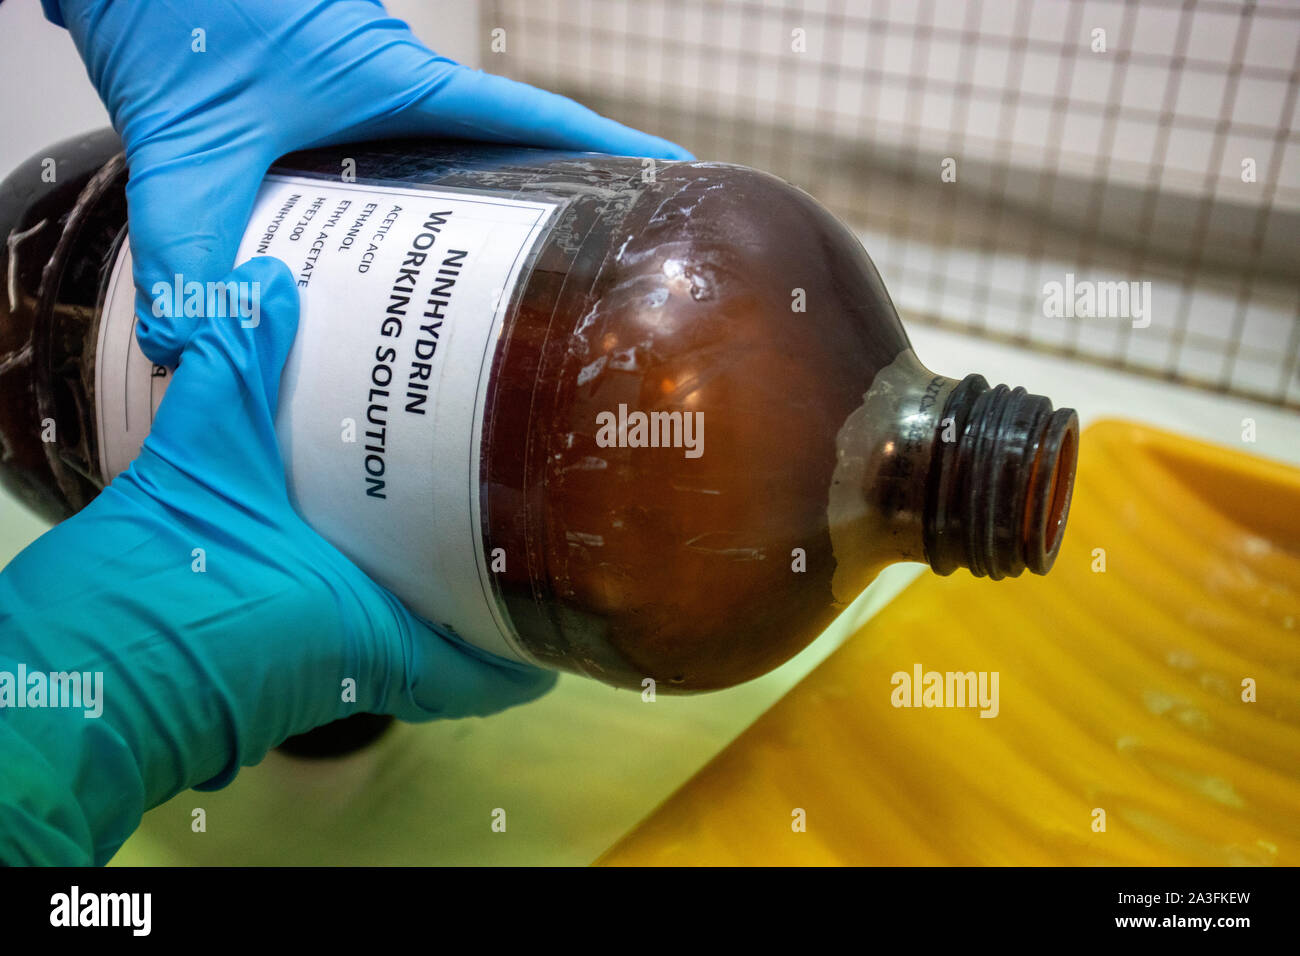 Ninhydrin being poured into a dip tray ready for the forensic examination of paper or porous surfaces at a Forensic Lab in the UK Stock Photo